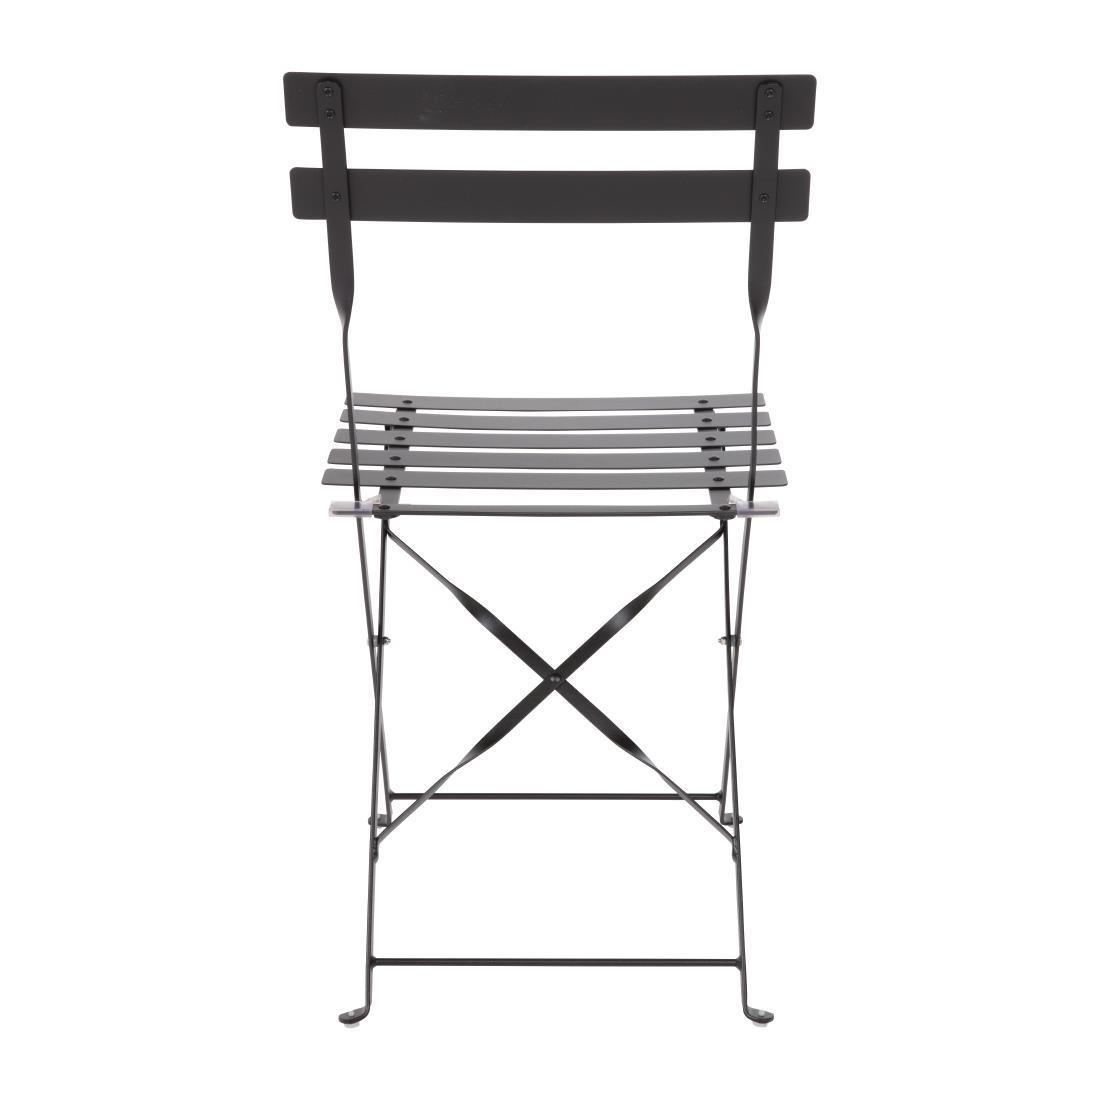 Bolero Black Pavement Style Steel Chairs (Pack of 2) - GH553  - 8